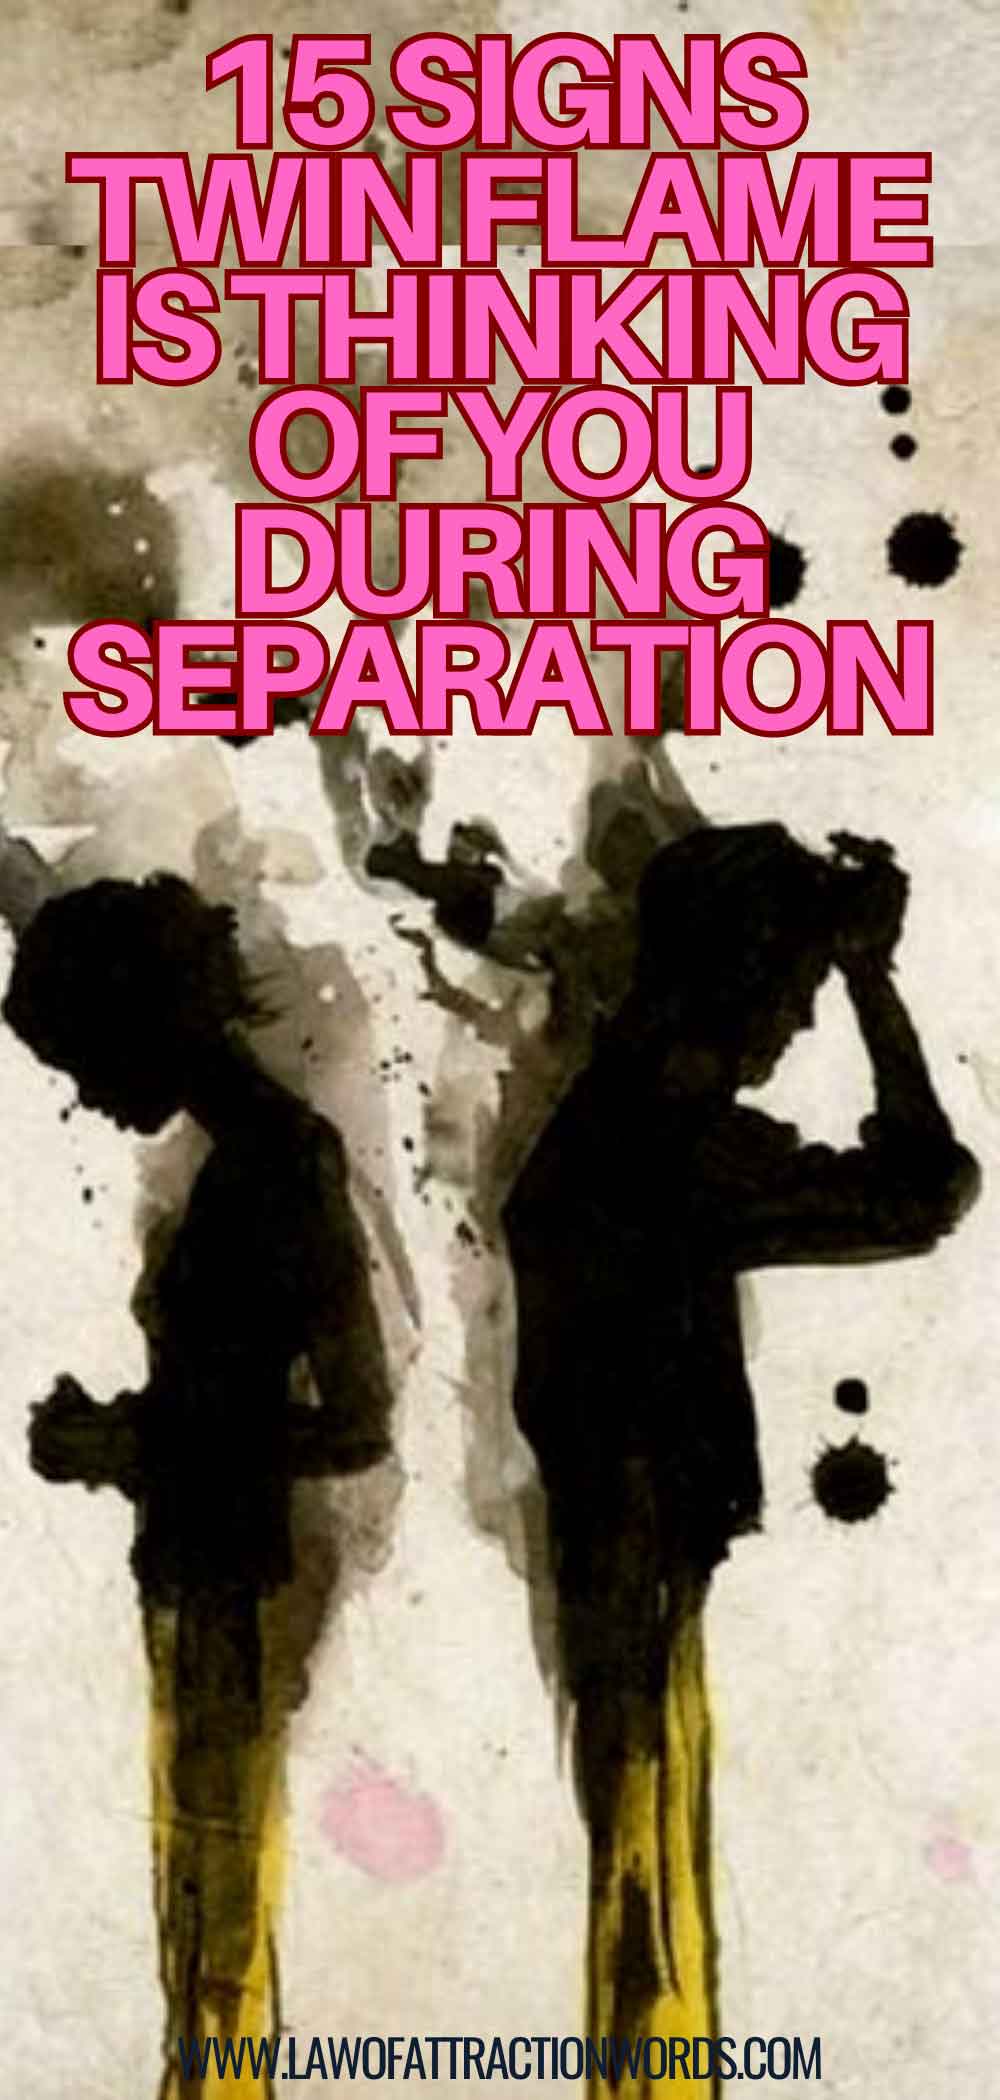 Signs Twin Flame Is Thinking Of You During Separation